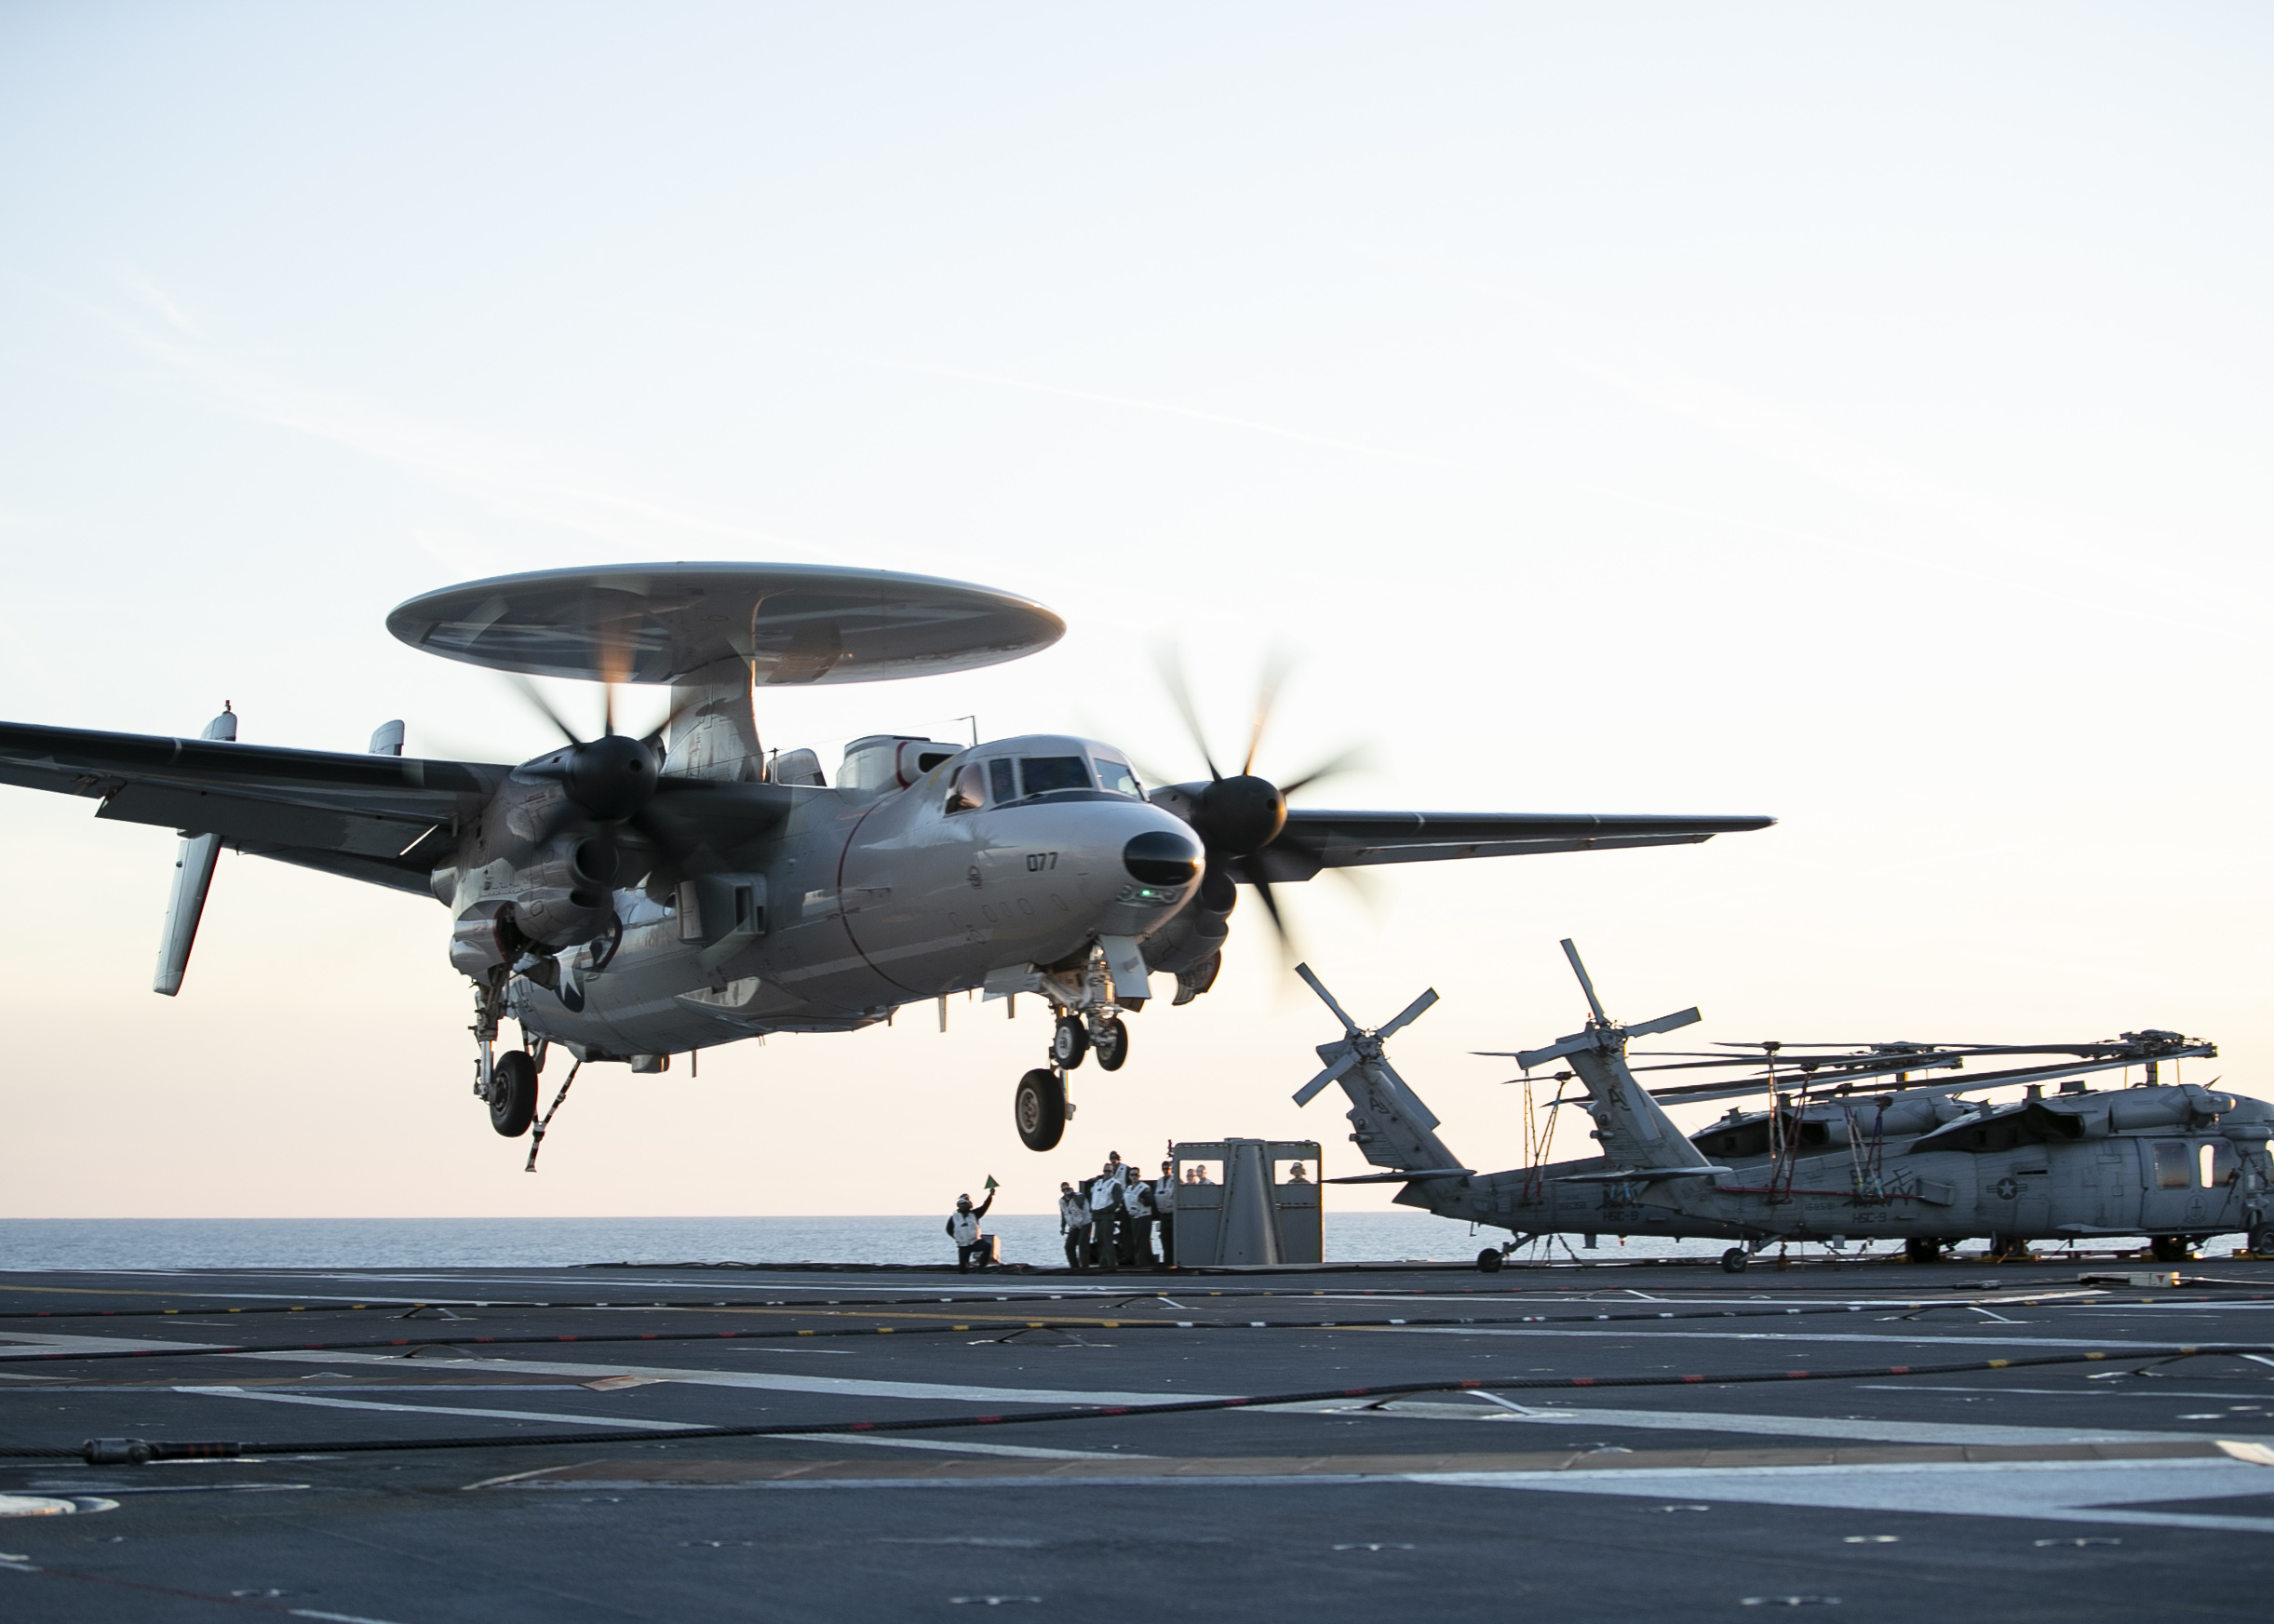 An E-2D Advanced Hawkeye assigned to Air Test and Evaluation Squadron (VX) 20 lands aboard the aircraft carrier USS Gerald R. Ford (CVN 78). The arrestment marked the first time an E-2D had landed aboard Gerald R. Ford. Gerald R. Ford is currently conducting aircraft compatibility testing to further test its electromagnetic aircraft launch systems and advanced arresting gear.